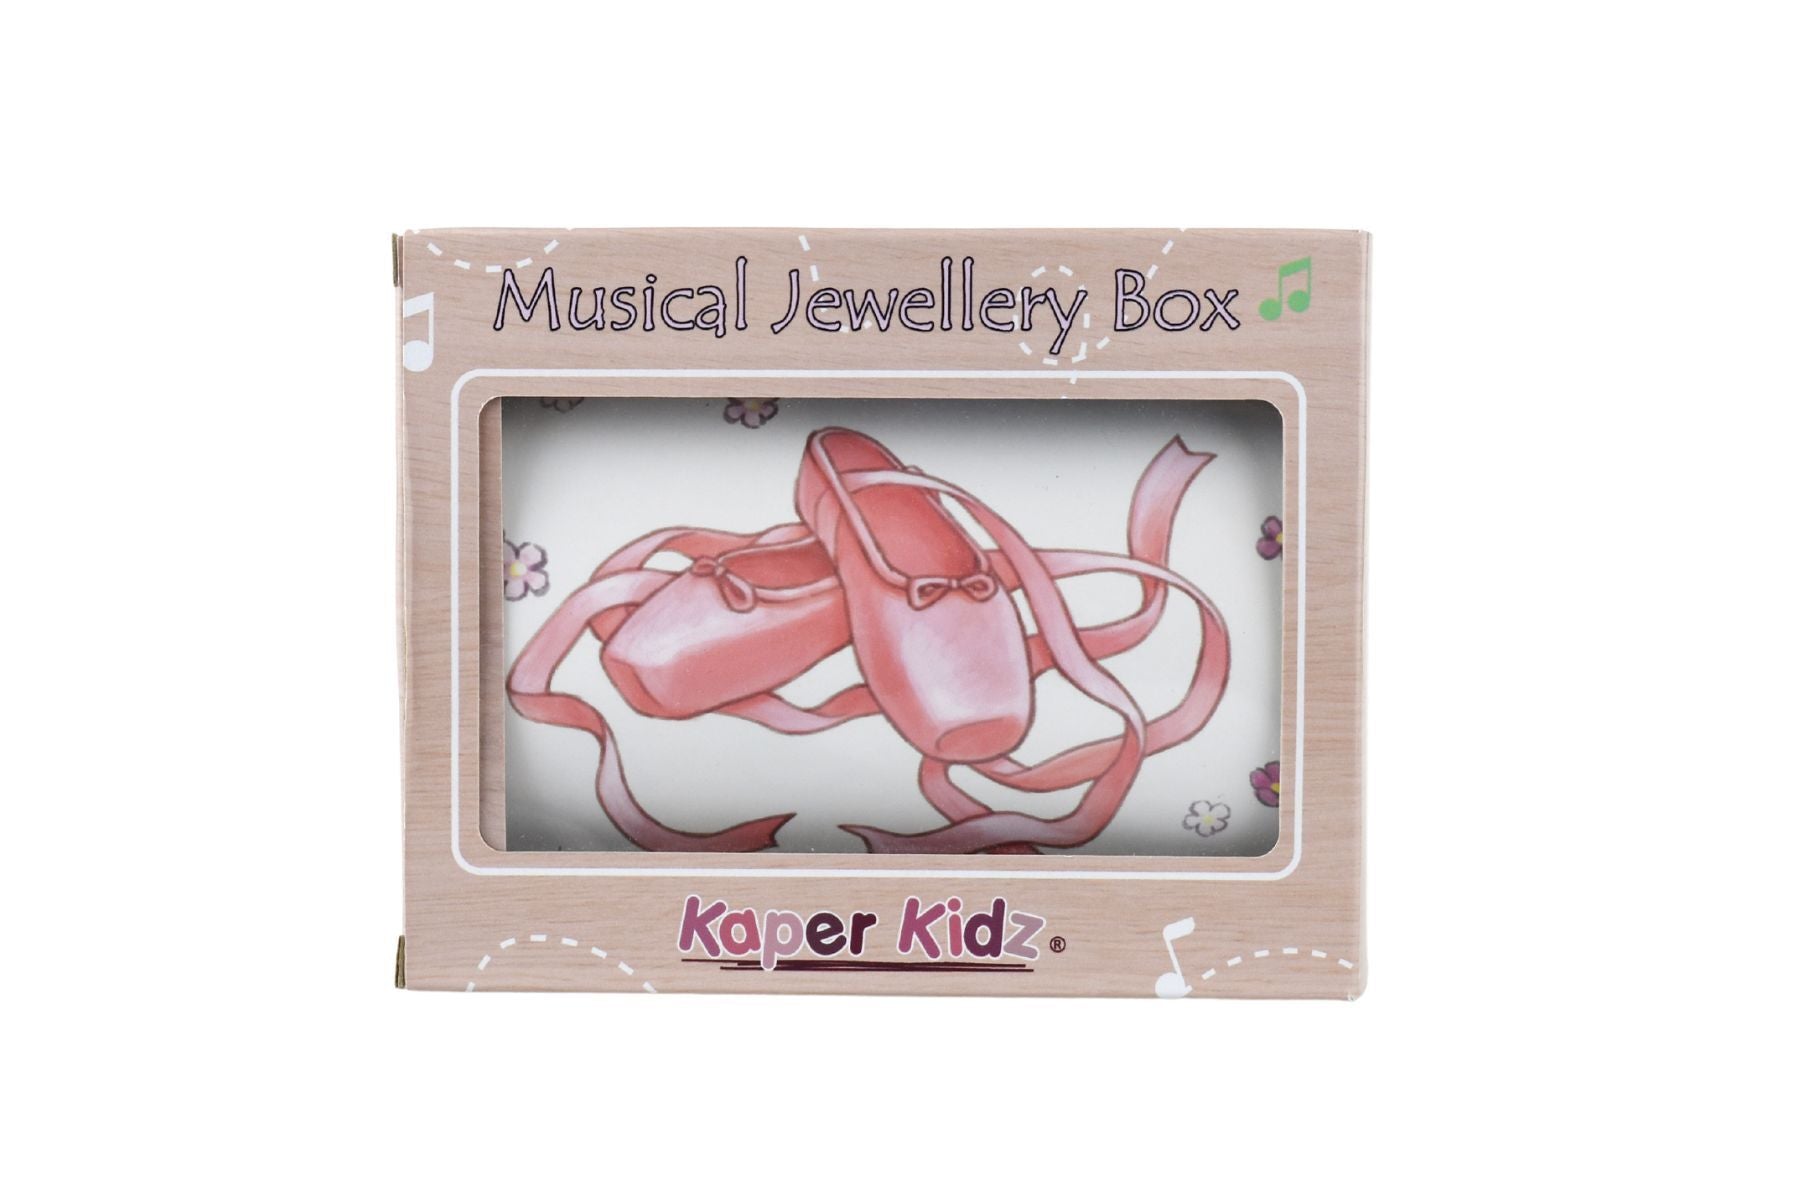 Packaging Image of Ballerina Dome Music Jewellery Box